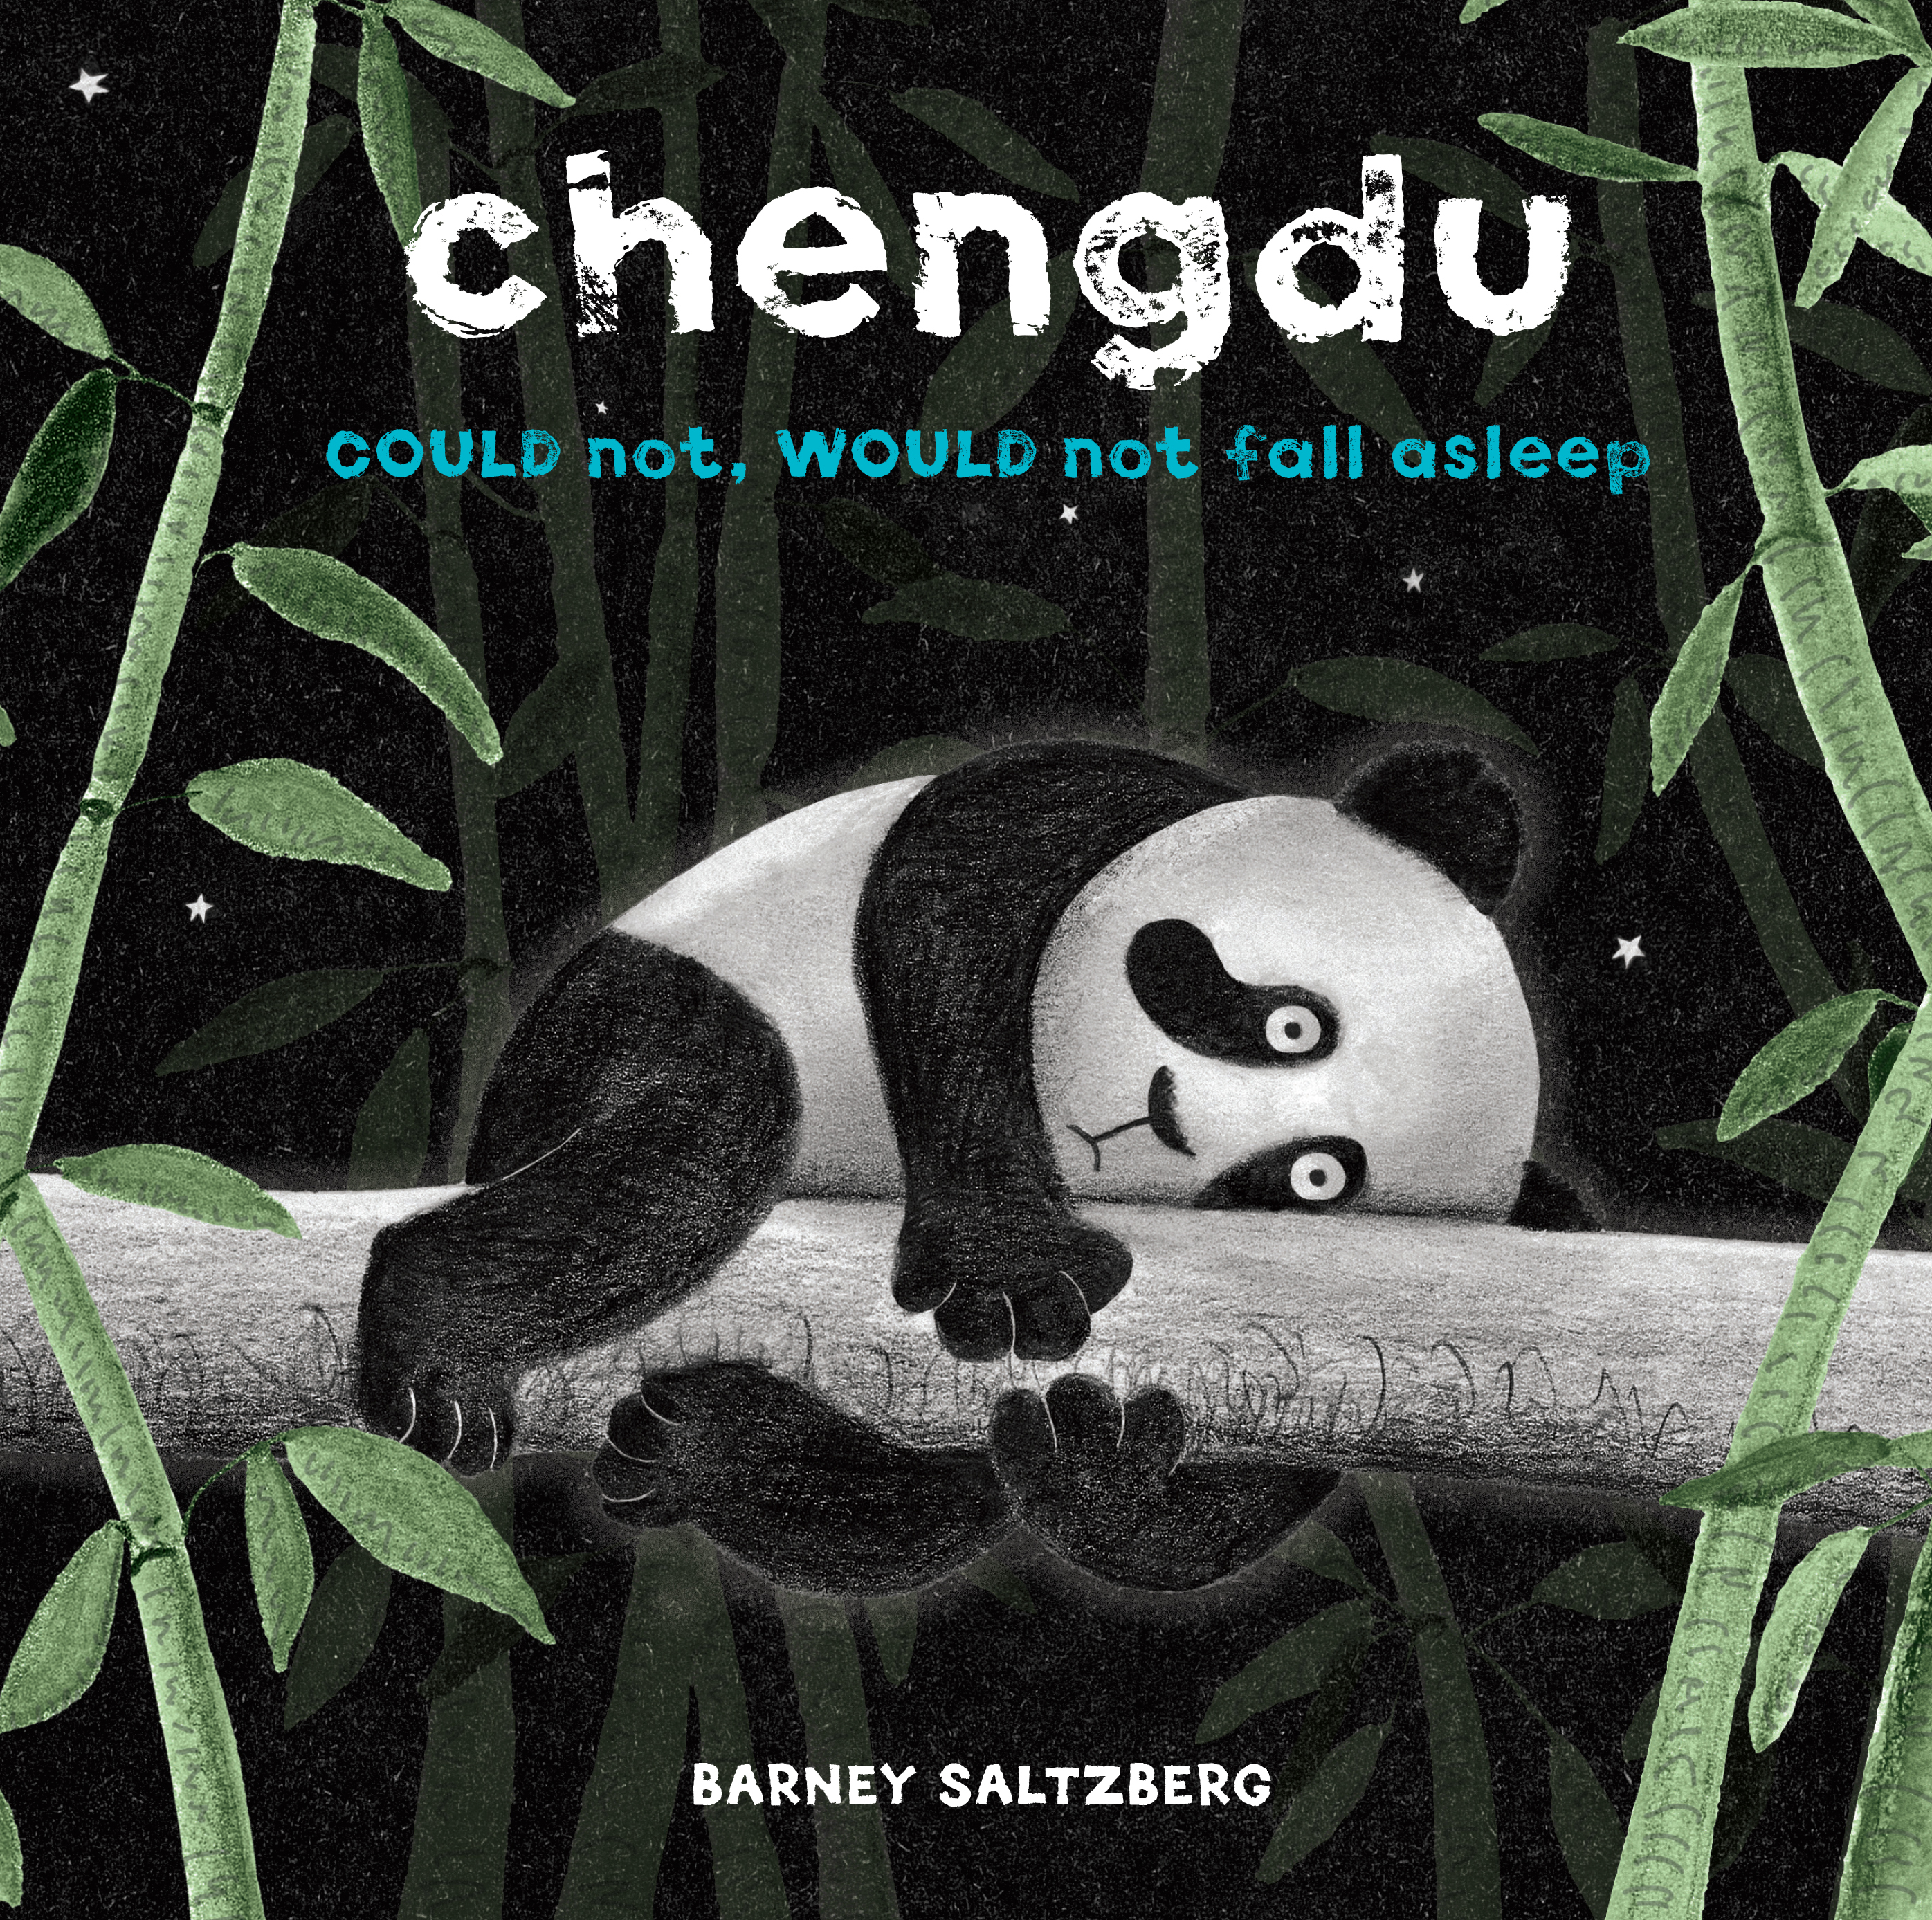 cover of book with a panda hanging from a tree